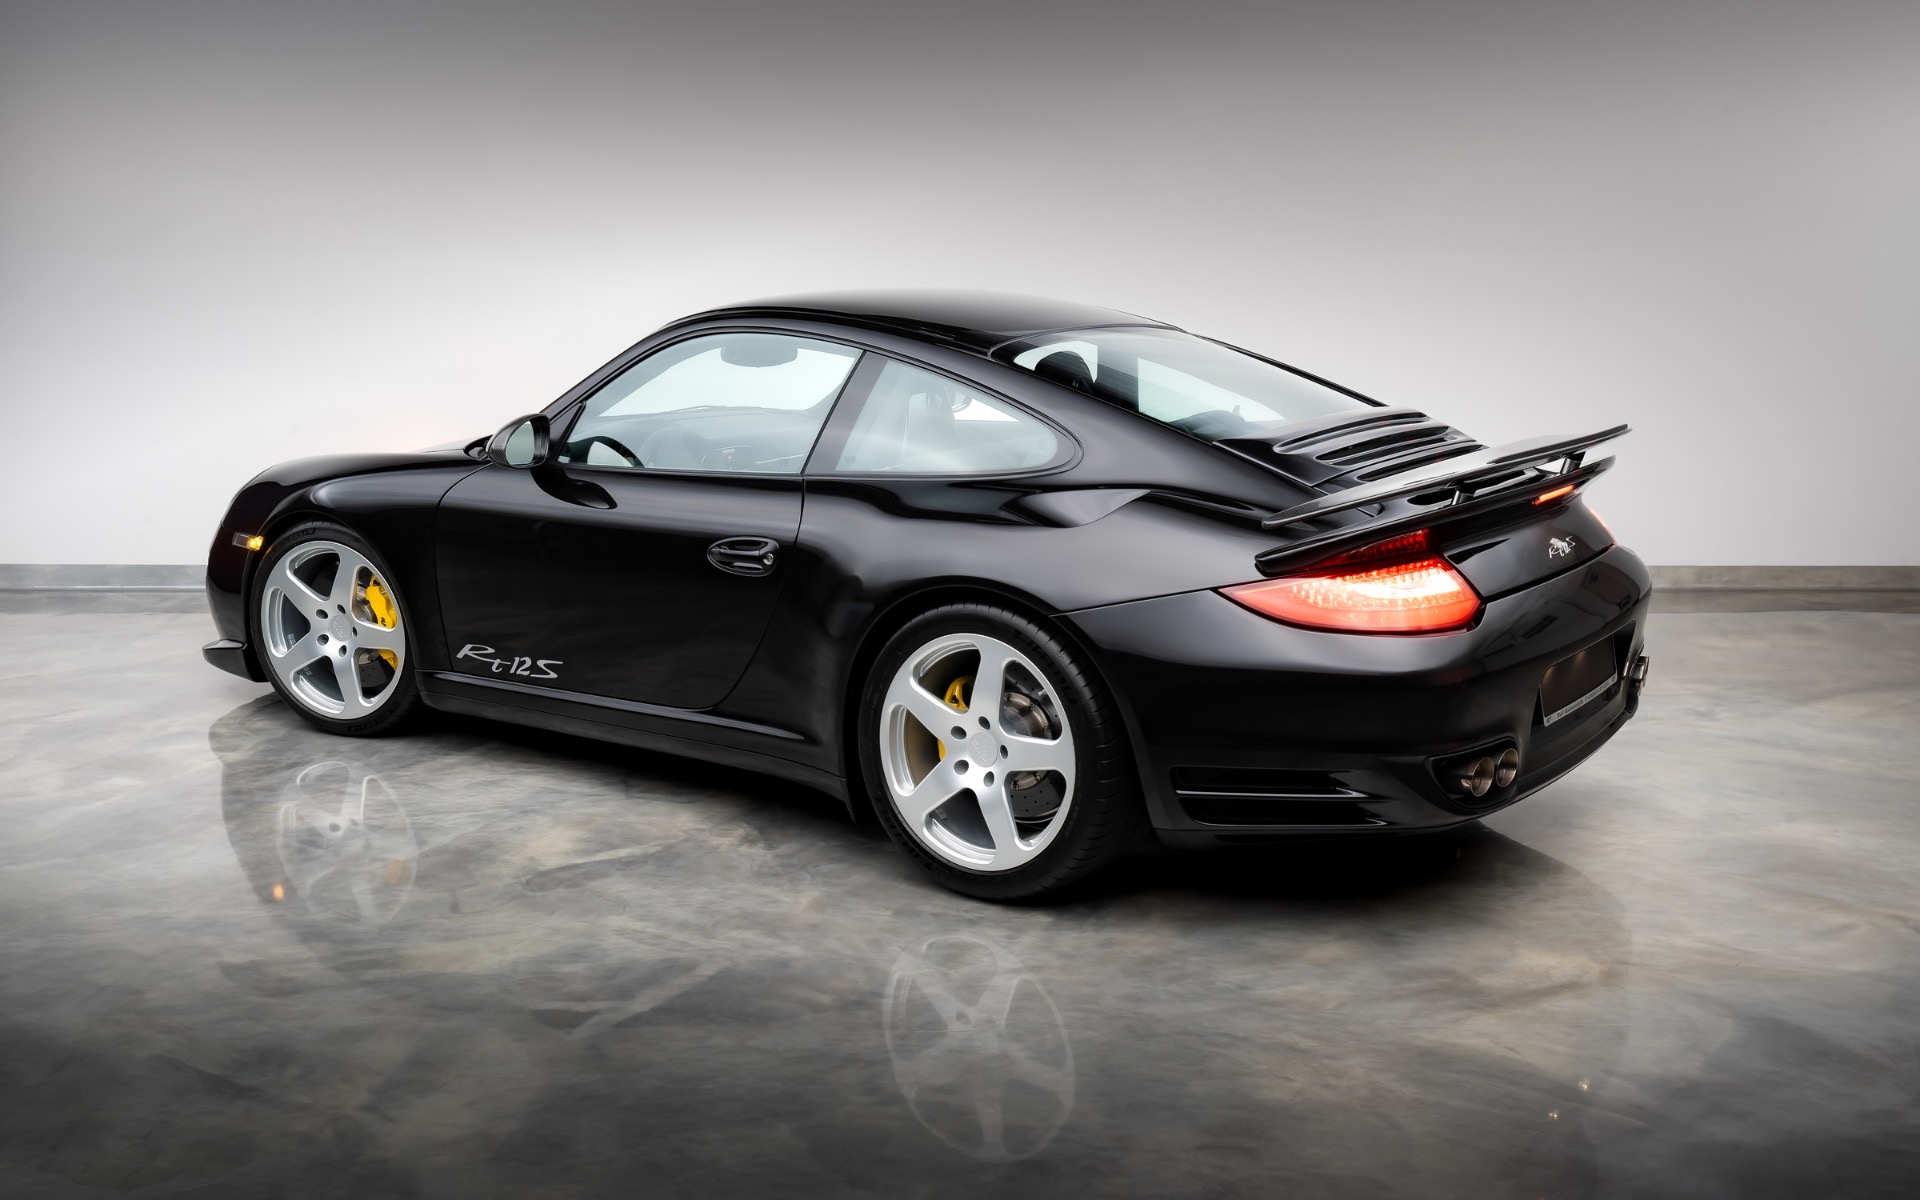 Used-2011-RUF-RT12S-Extremely-RARE-Code-W09-Only-500-Miles-685-HP-Manual--AWD-THE-BEST